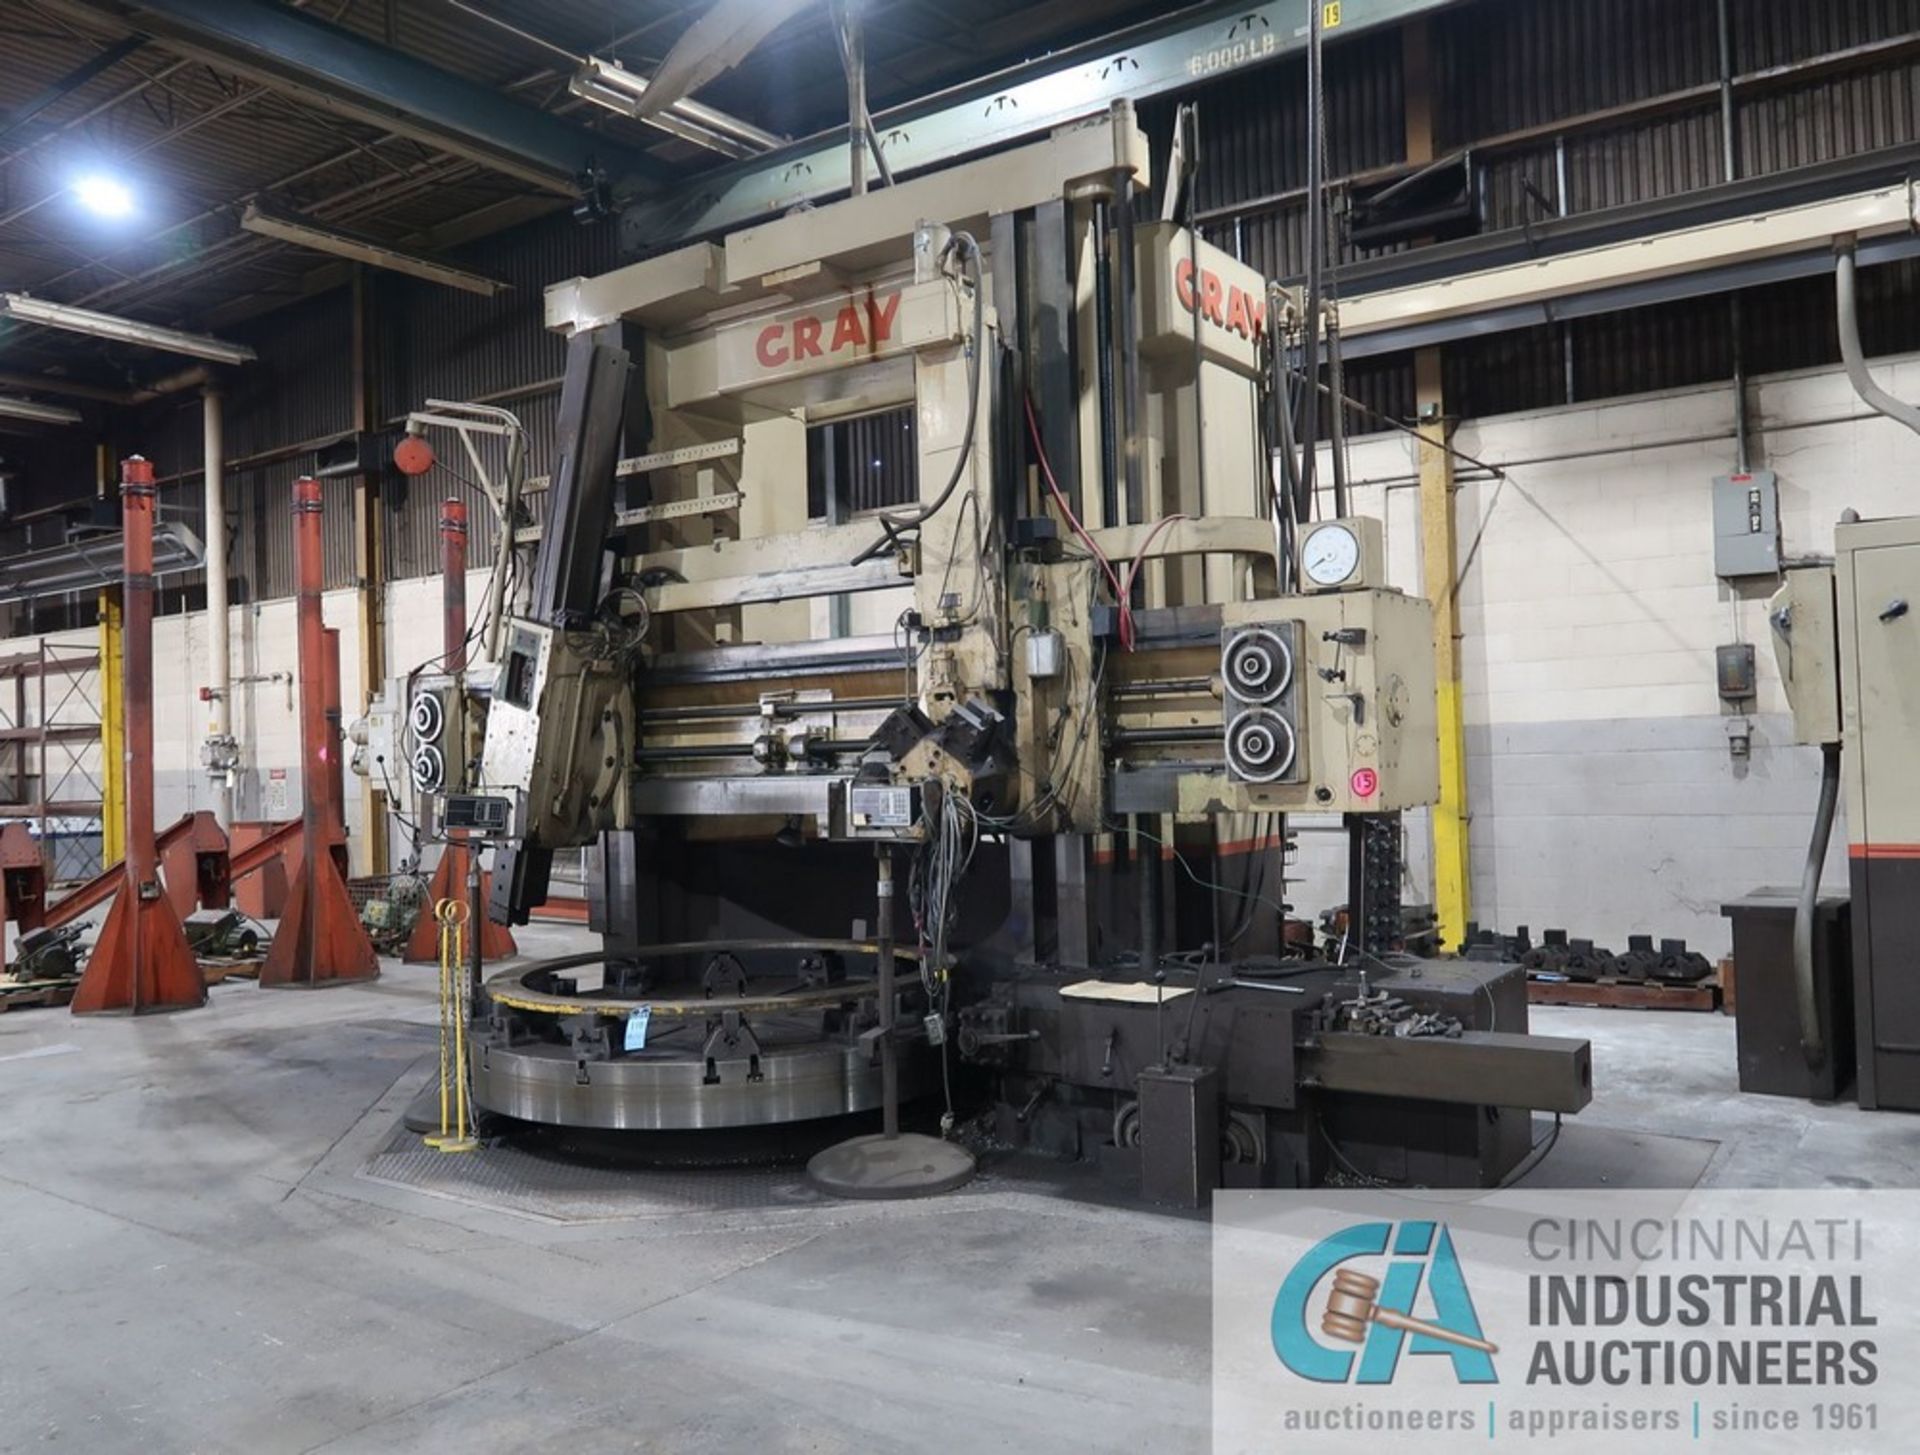 84" GRAY VERTICAL BORING MILL S/N 9695 84" DIAMETER TABLE, 96" MAX SWING, 72" VERTICAL CLEARANCE,